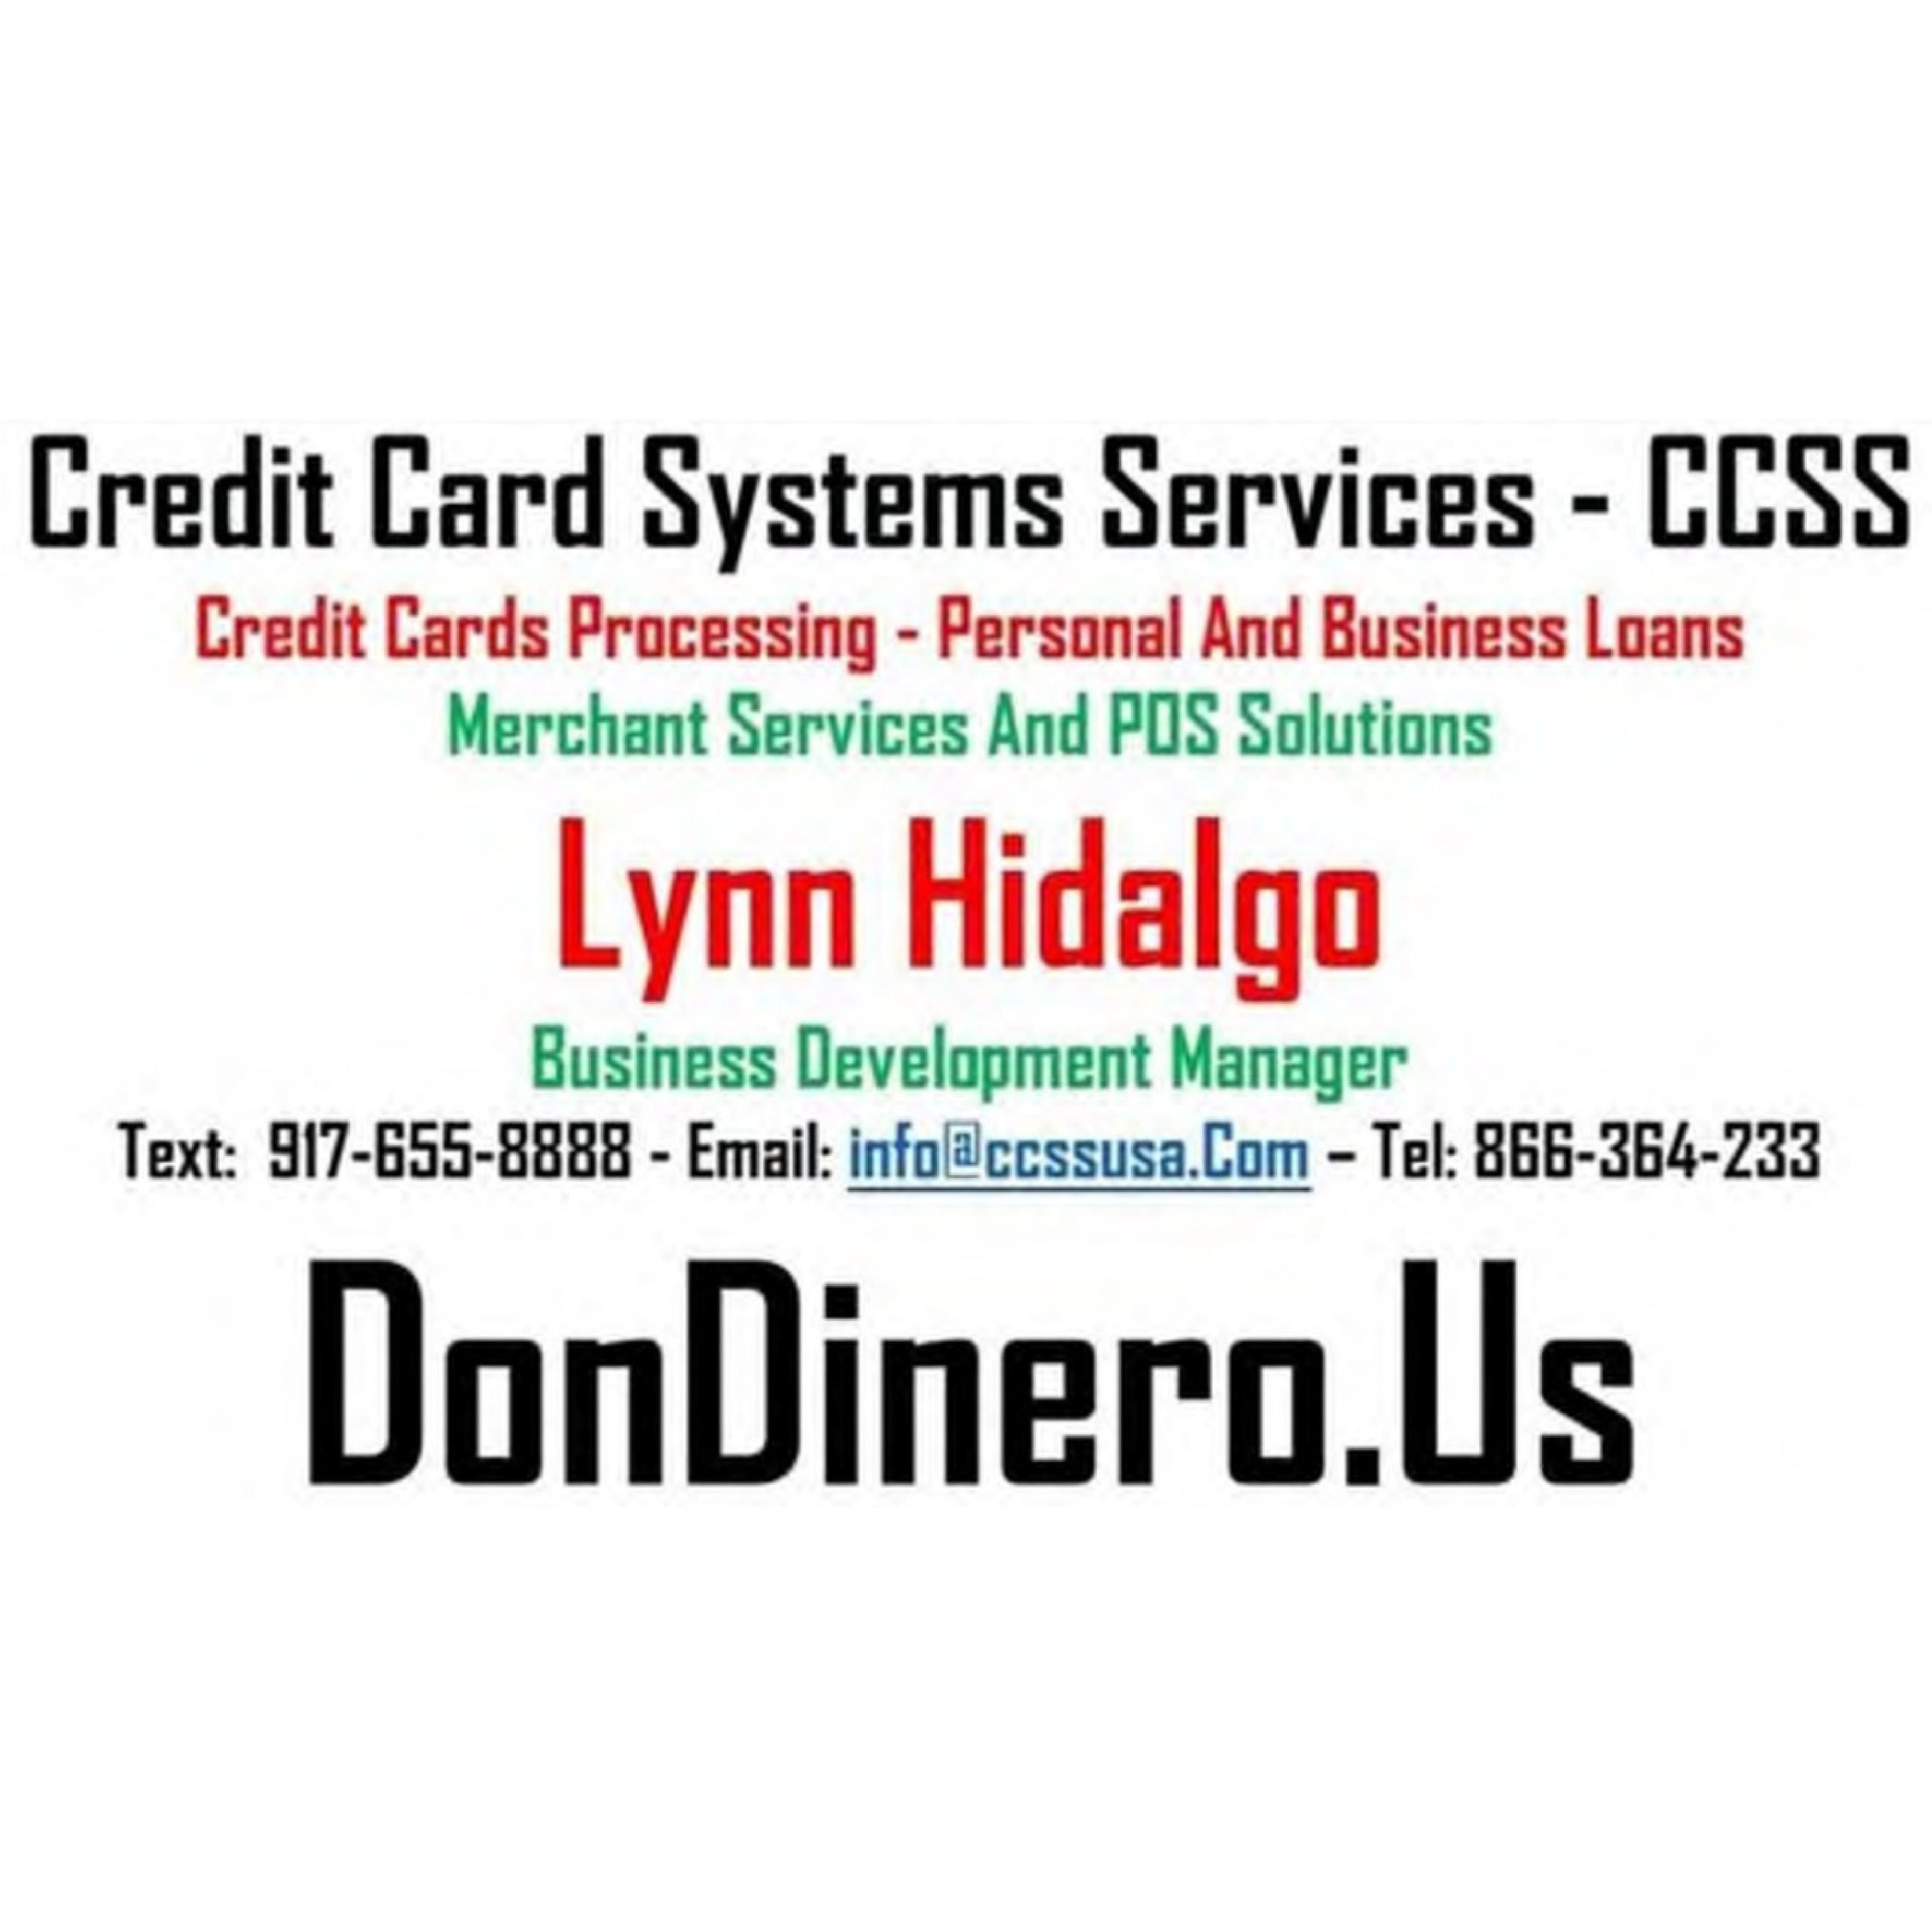 CCSS BUSINESS FINANCE & CREDIT CARDS PROCESSING AND FOOD STAMP